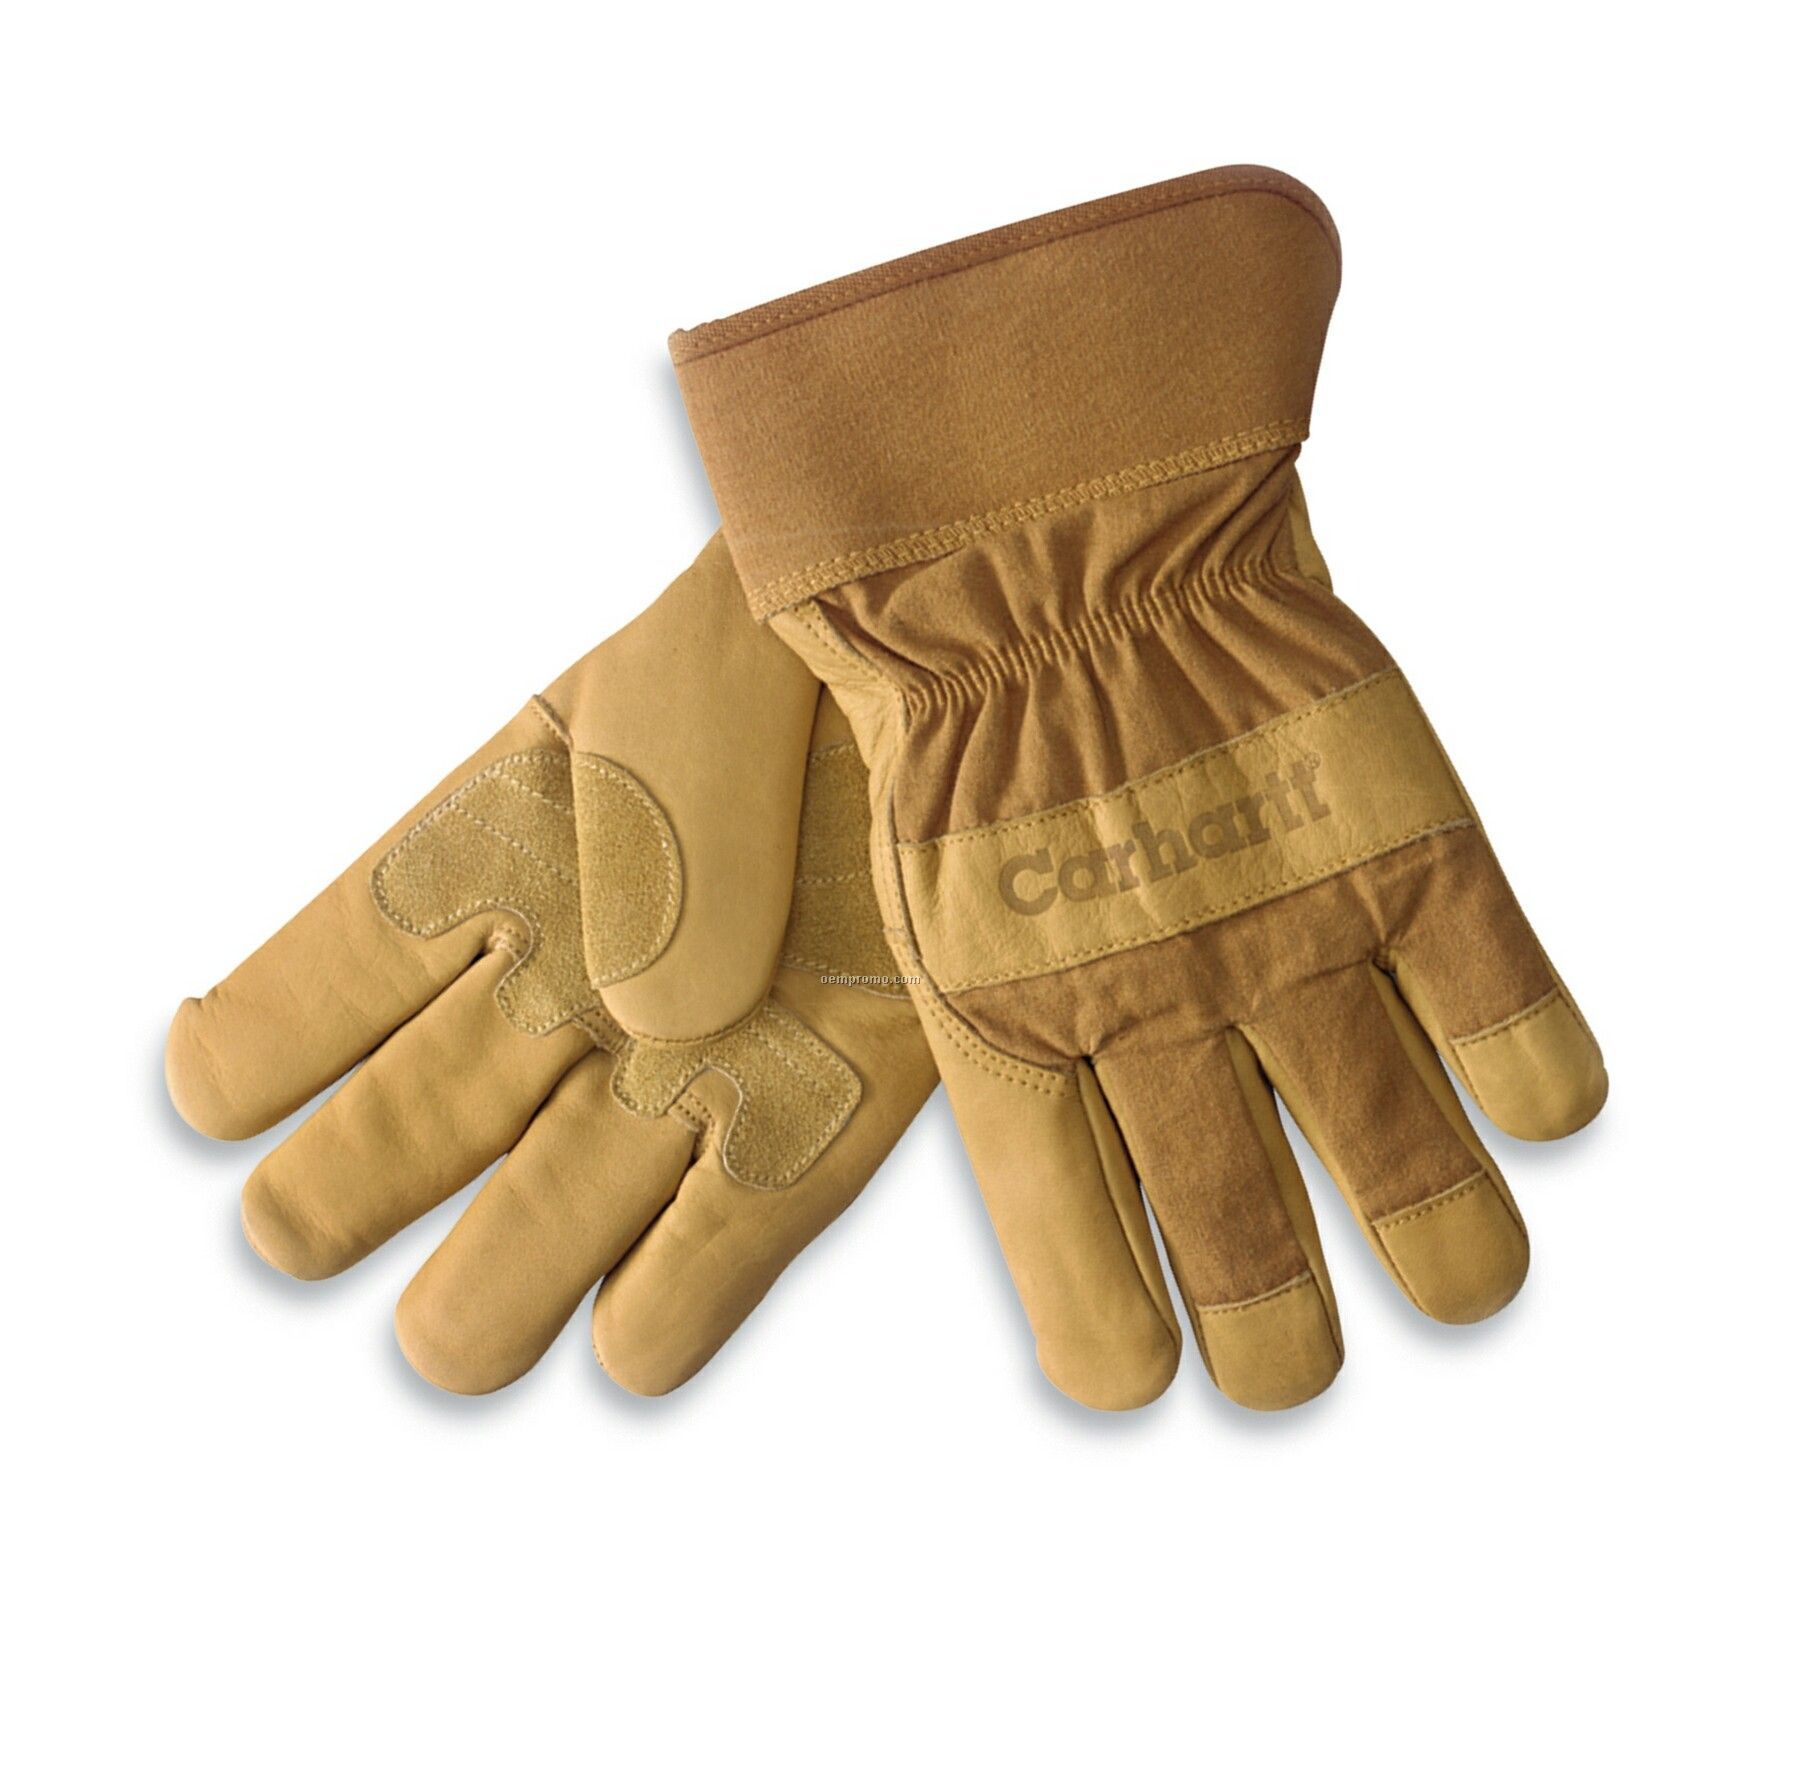 Carhartt Men's Insulated Leather Palm Gloves W/ Safety Cuff